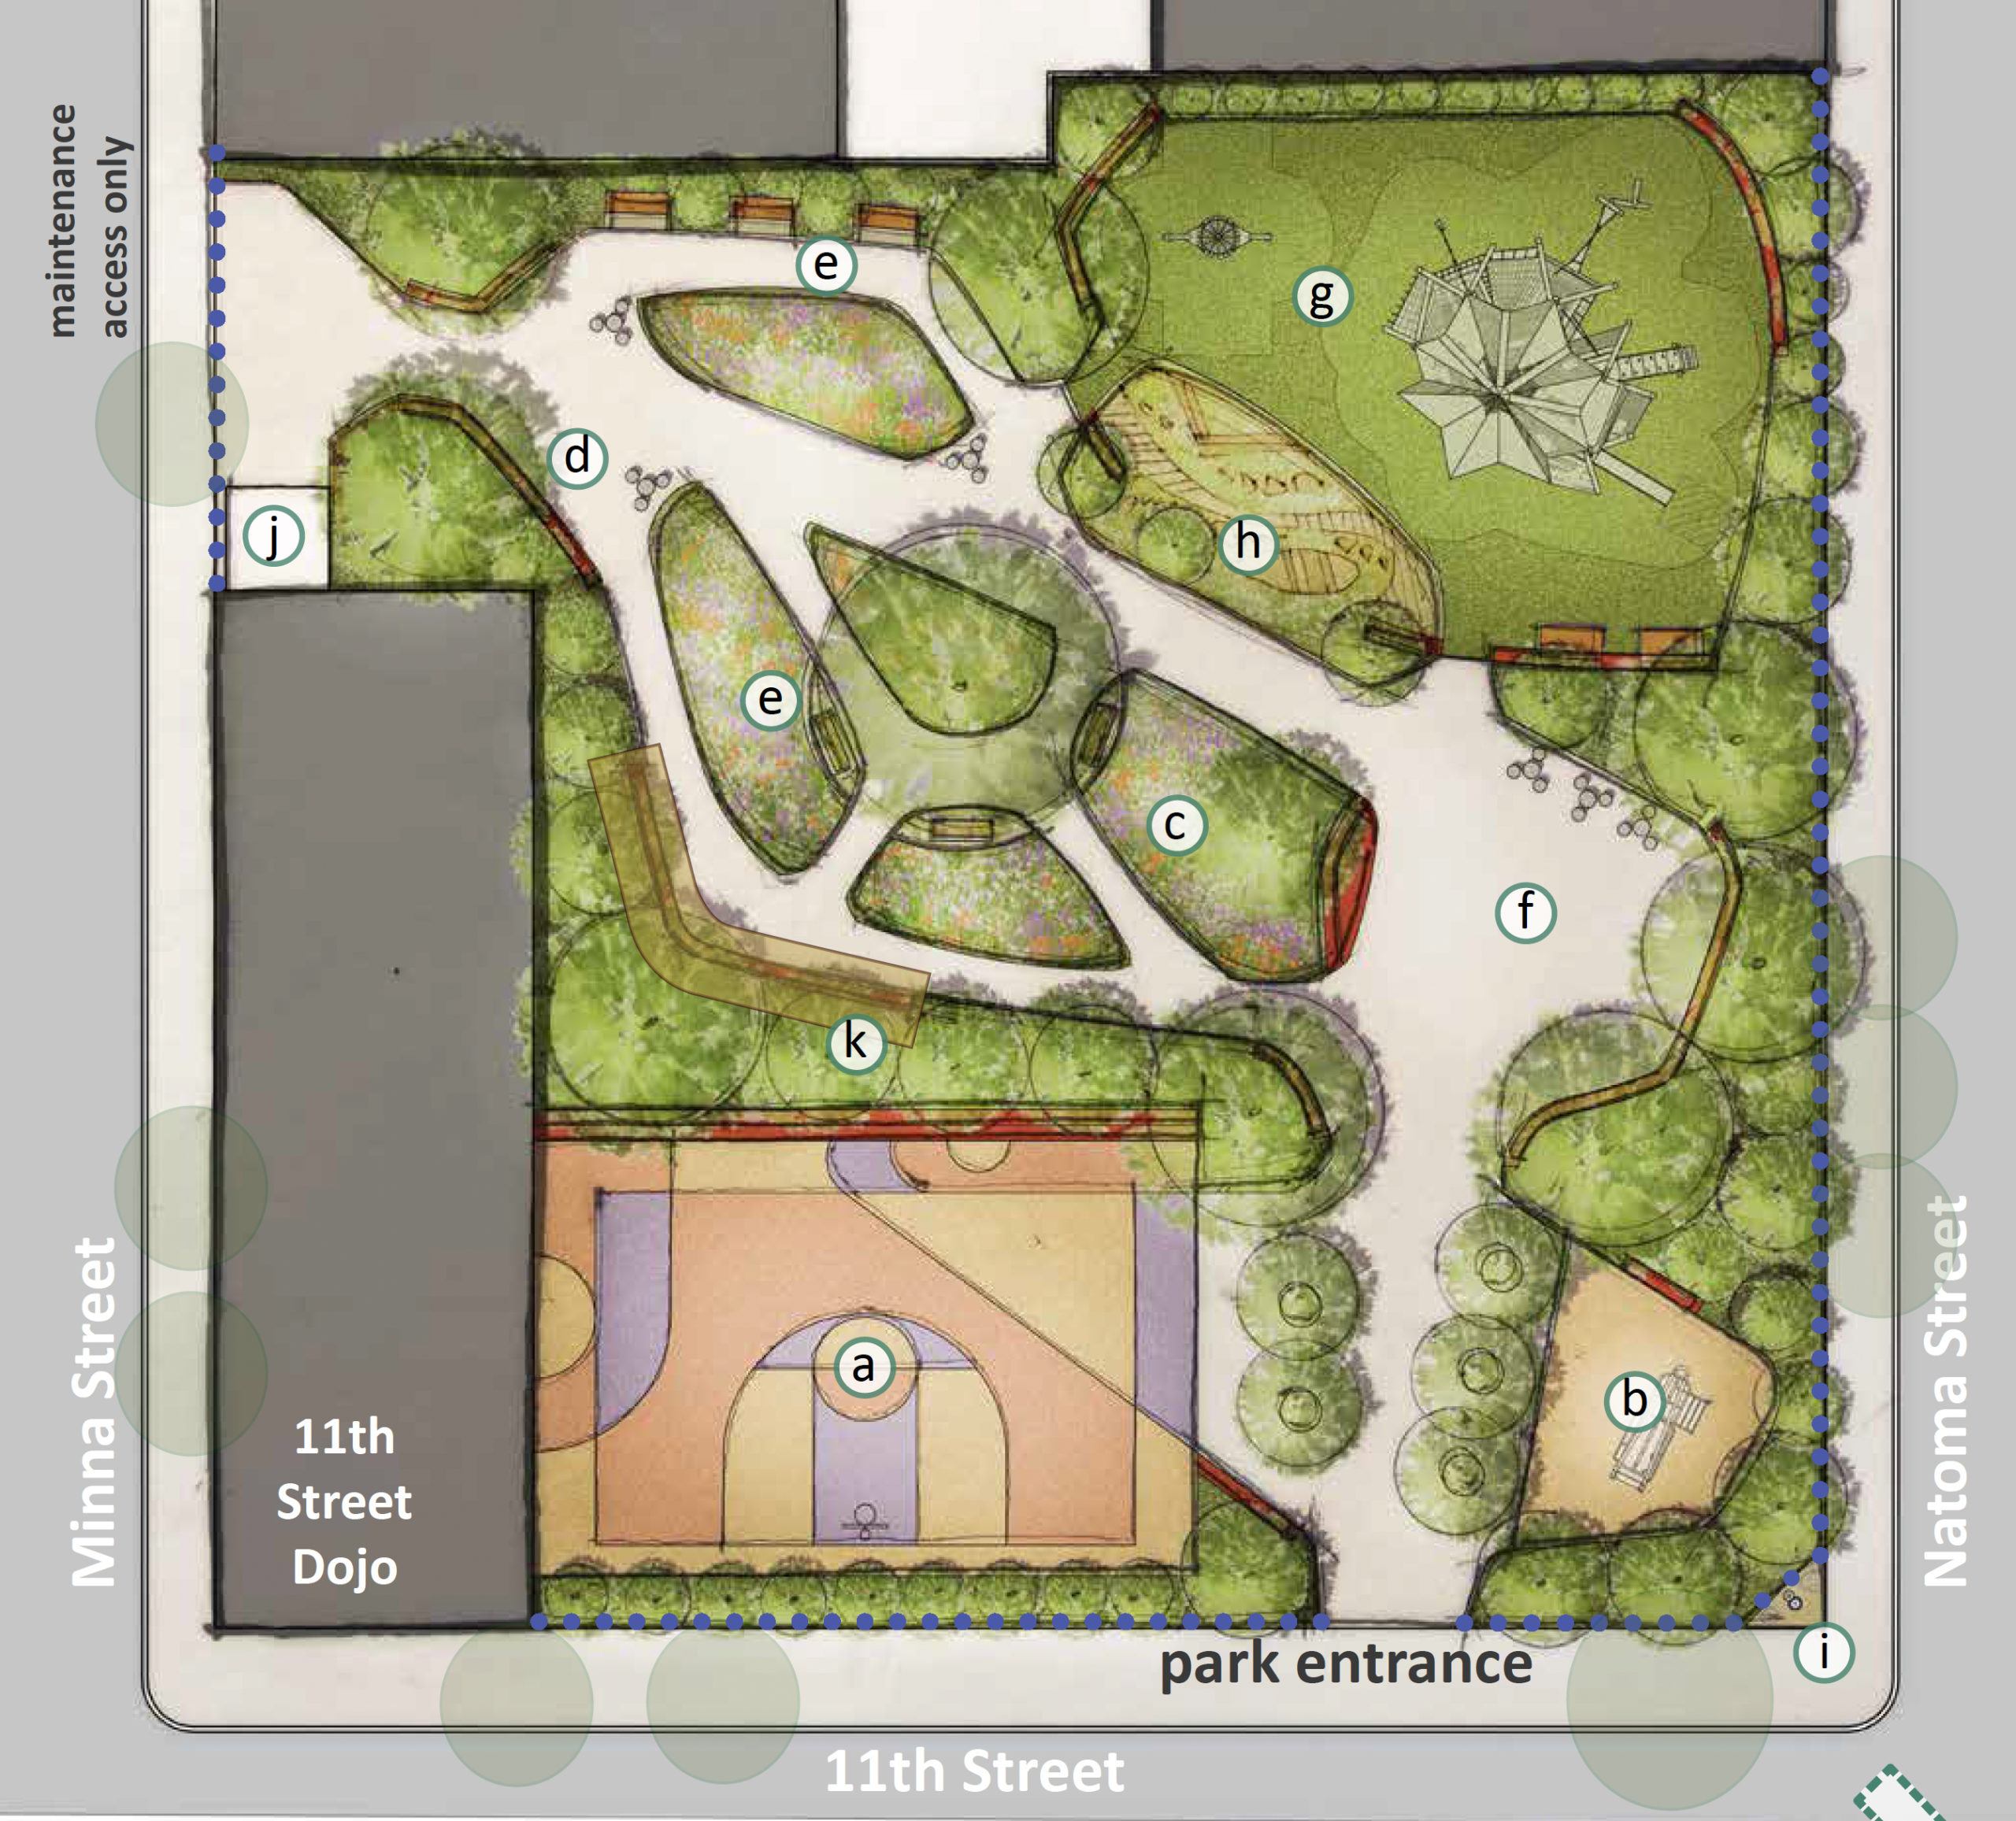 11th and Natoma Street Park landscaping map, image via SF Public Works